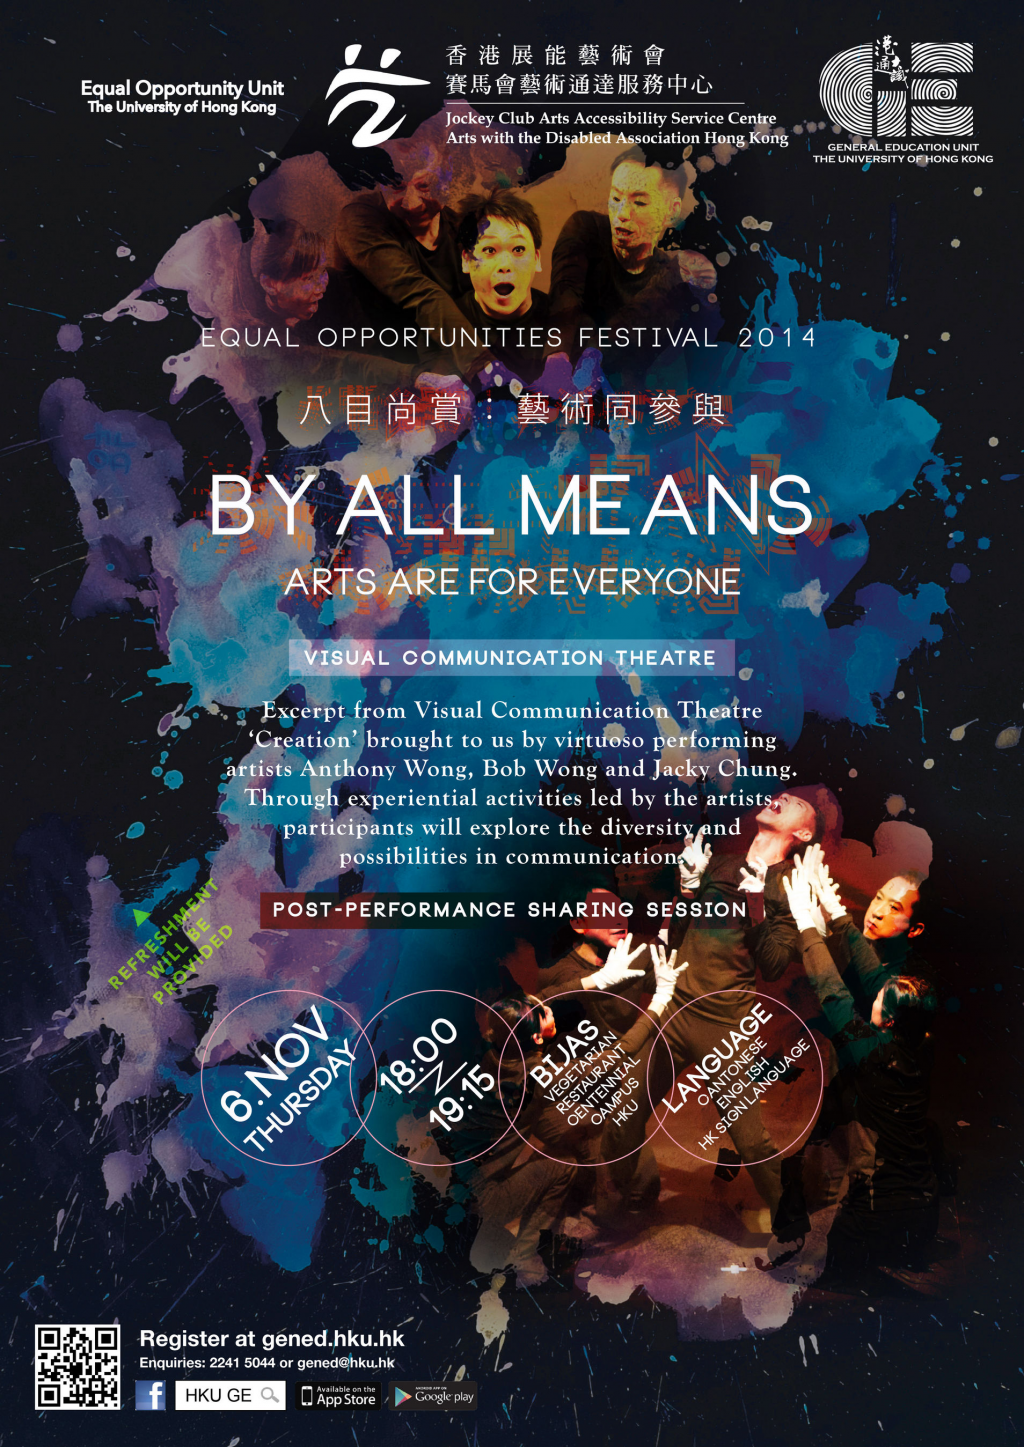 By All Means: Arts are for Everyone - Visual Communication Theatre and Sharing Session  八目尚賞︰藝術同參與 - 視覺溝通劇場及演後談